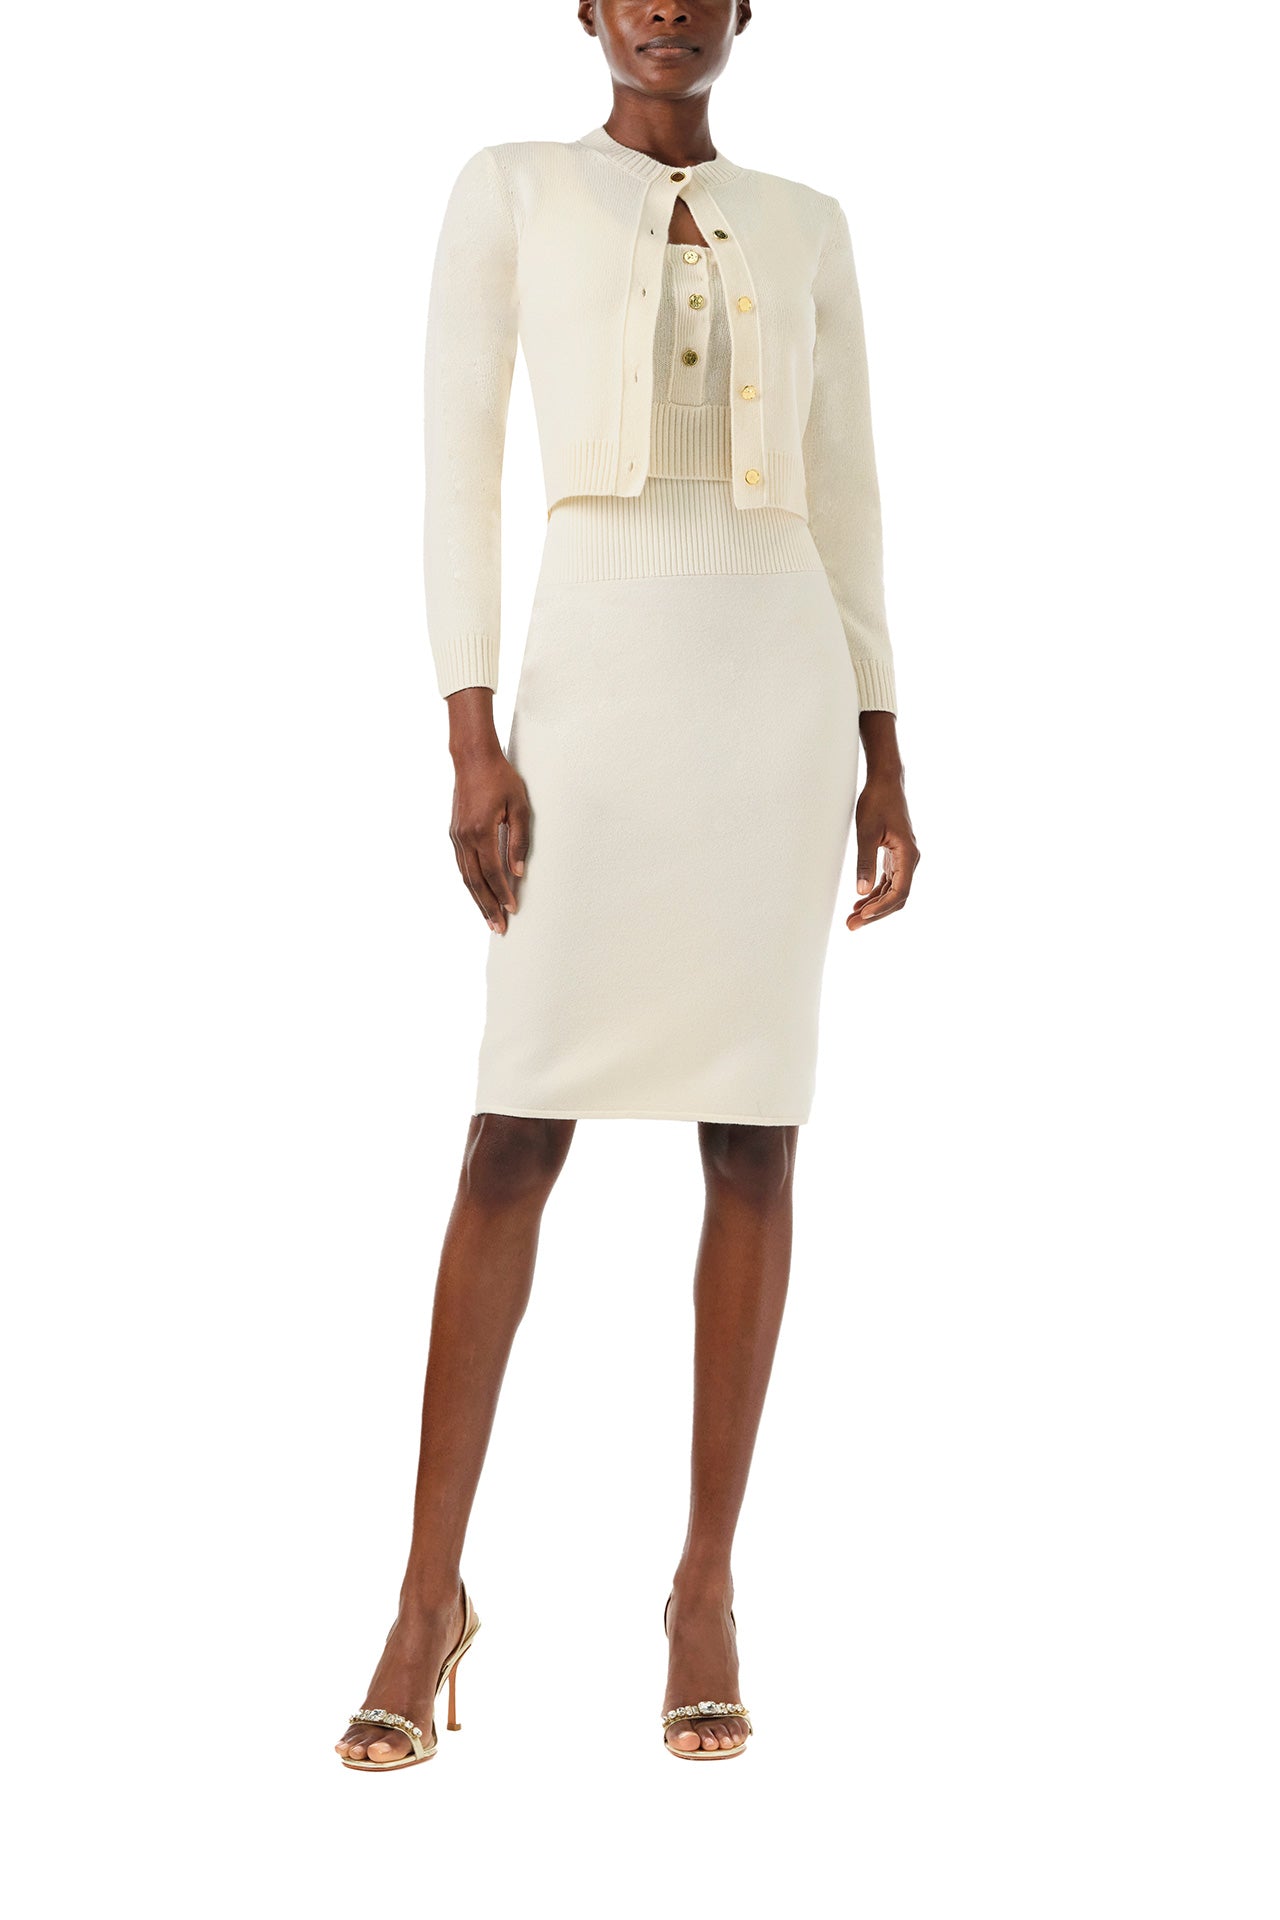 Monique Lhuillier Spring 2024 white cropped cashmere tank with scoop neck and gold button closure - front with cardigan.